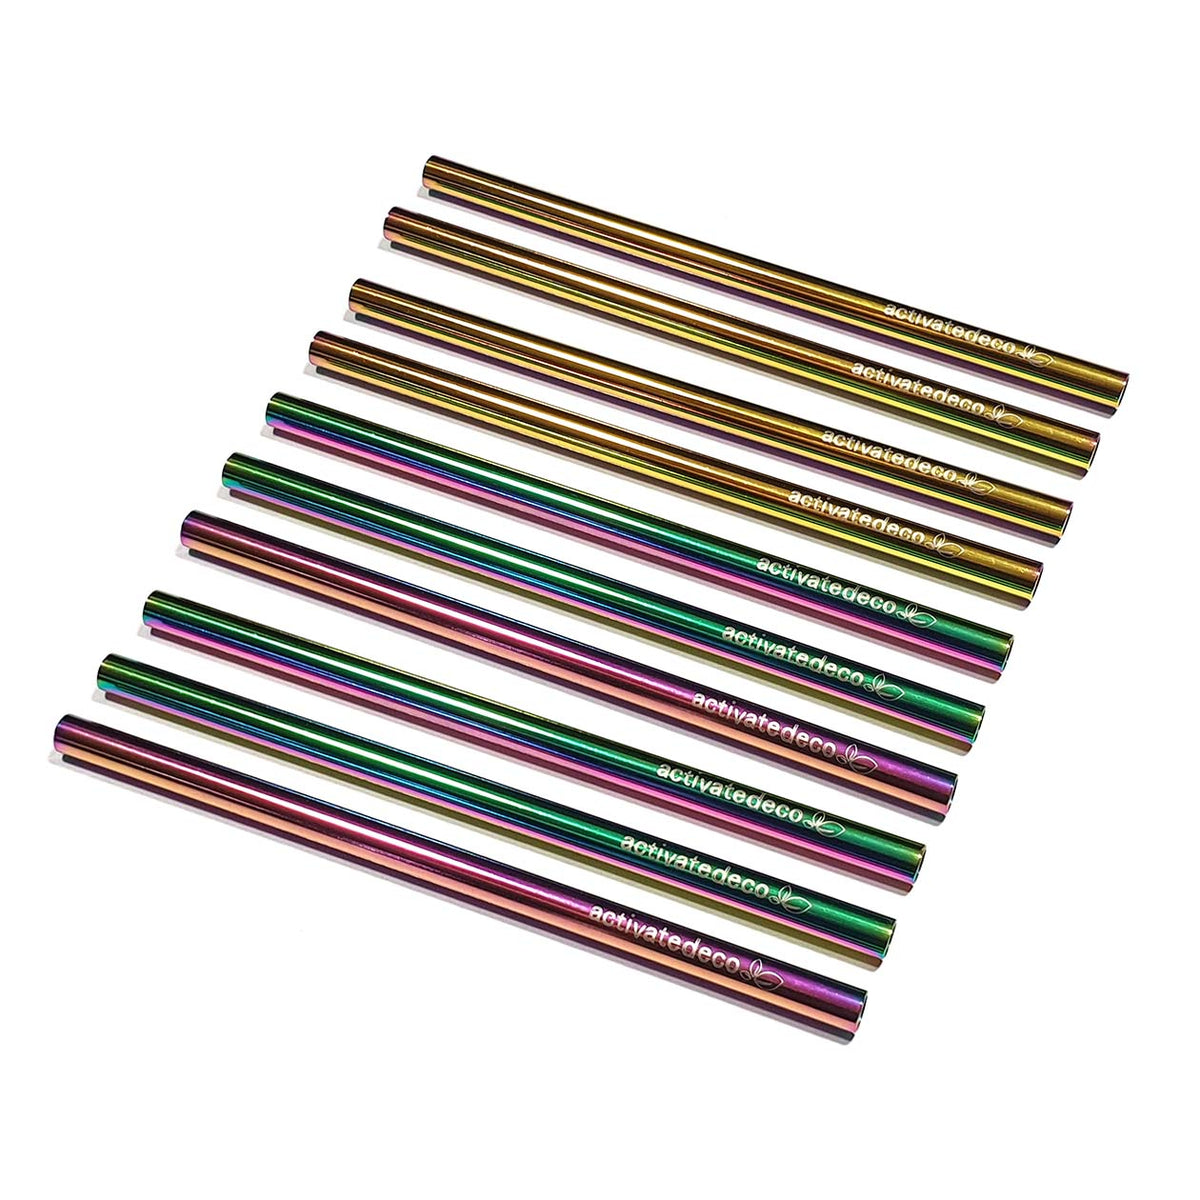 Extra Short Reusable Stainless Steel Drink Straws for Cocktails, Small Glasses or Cups, Gold